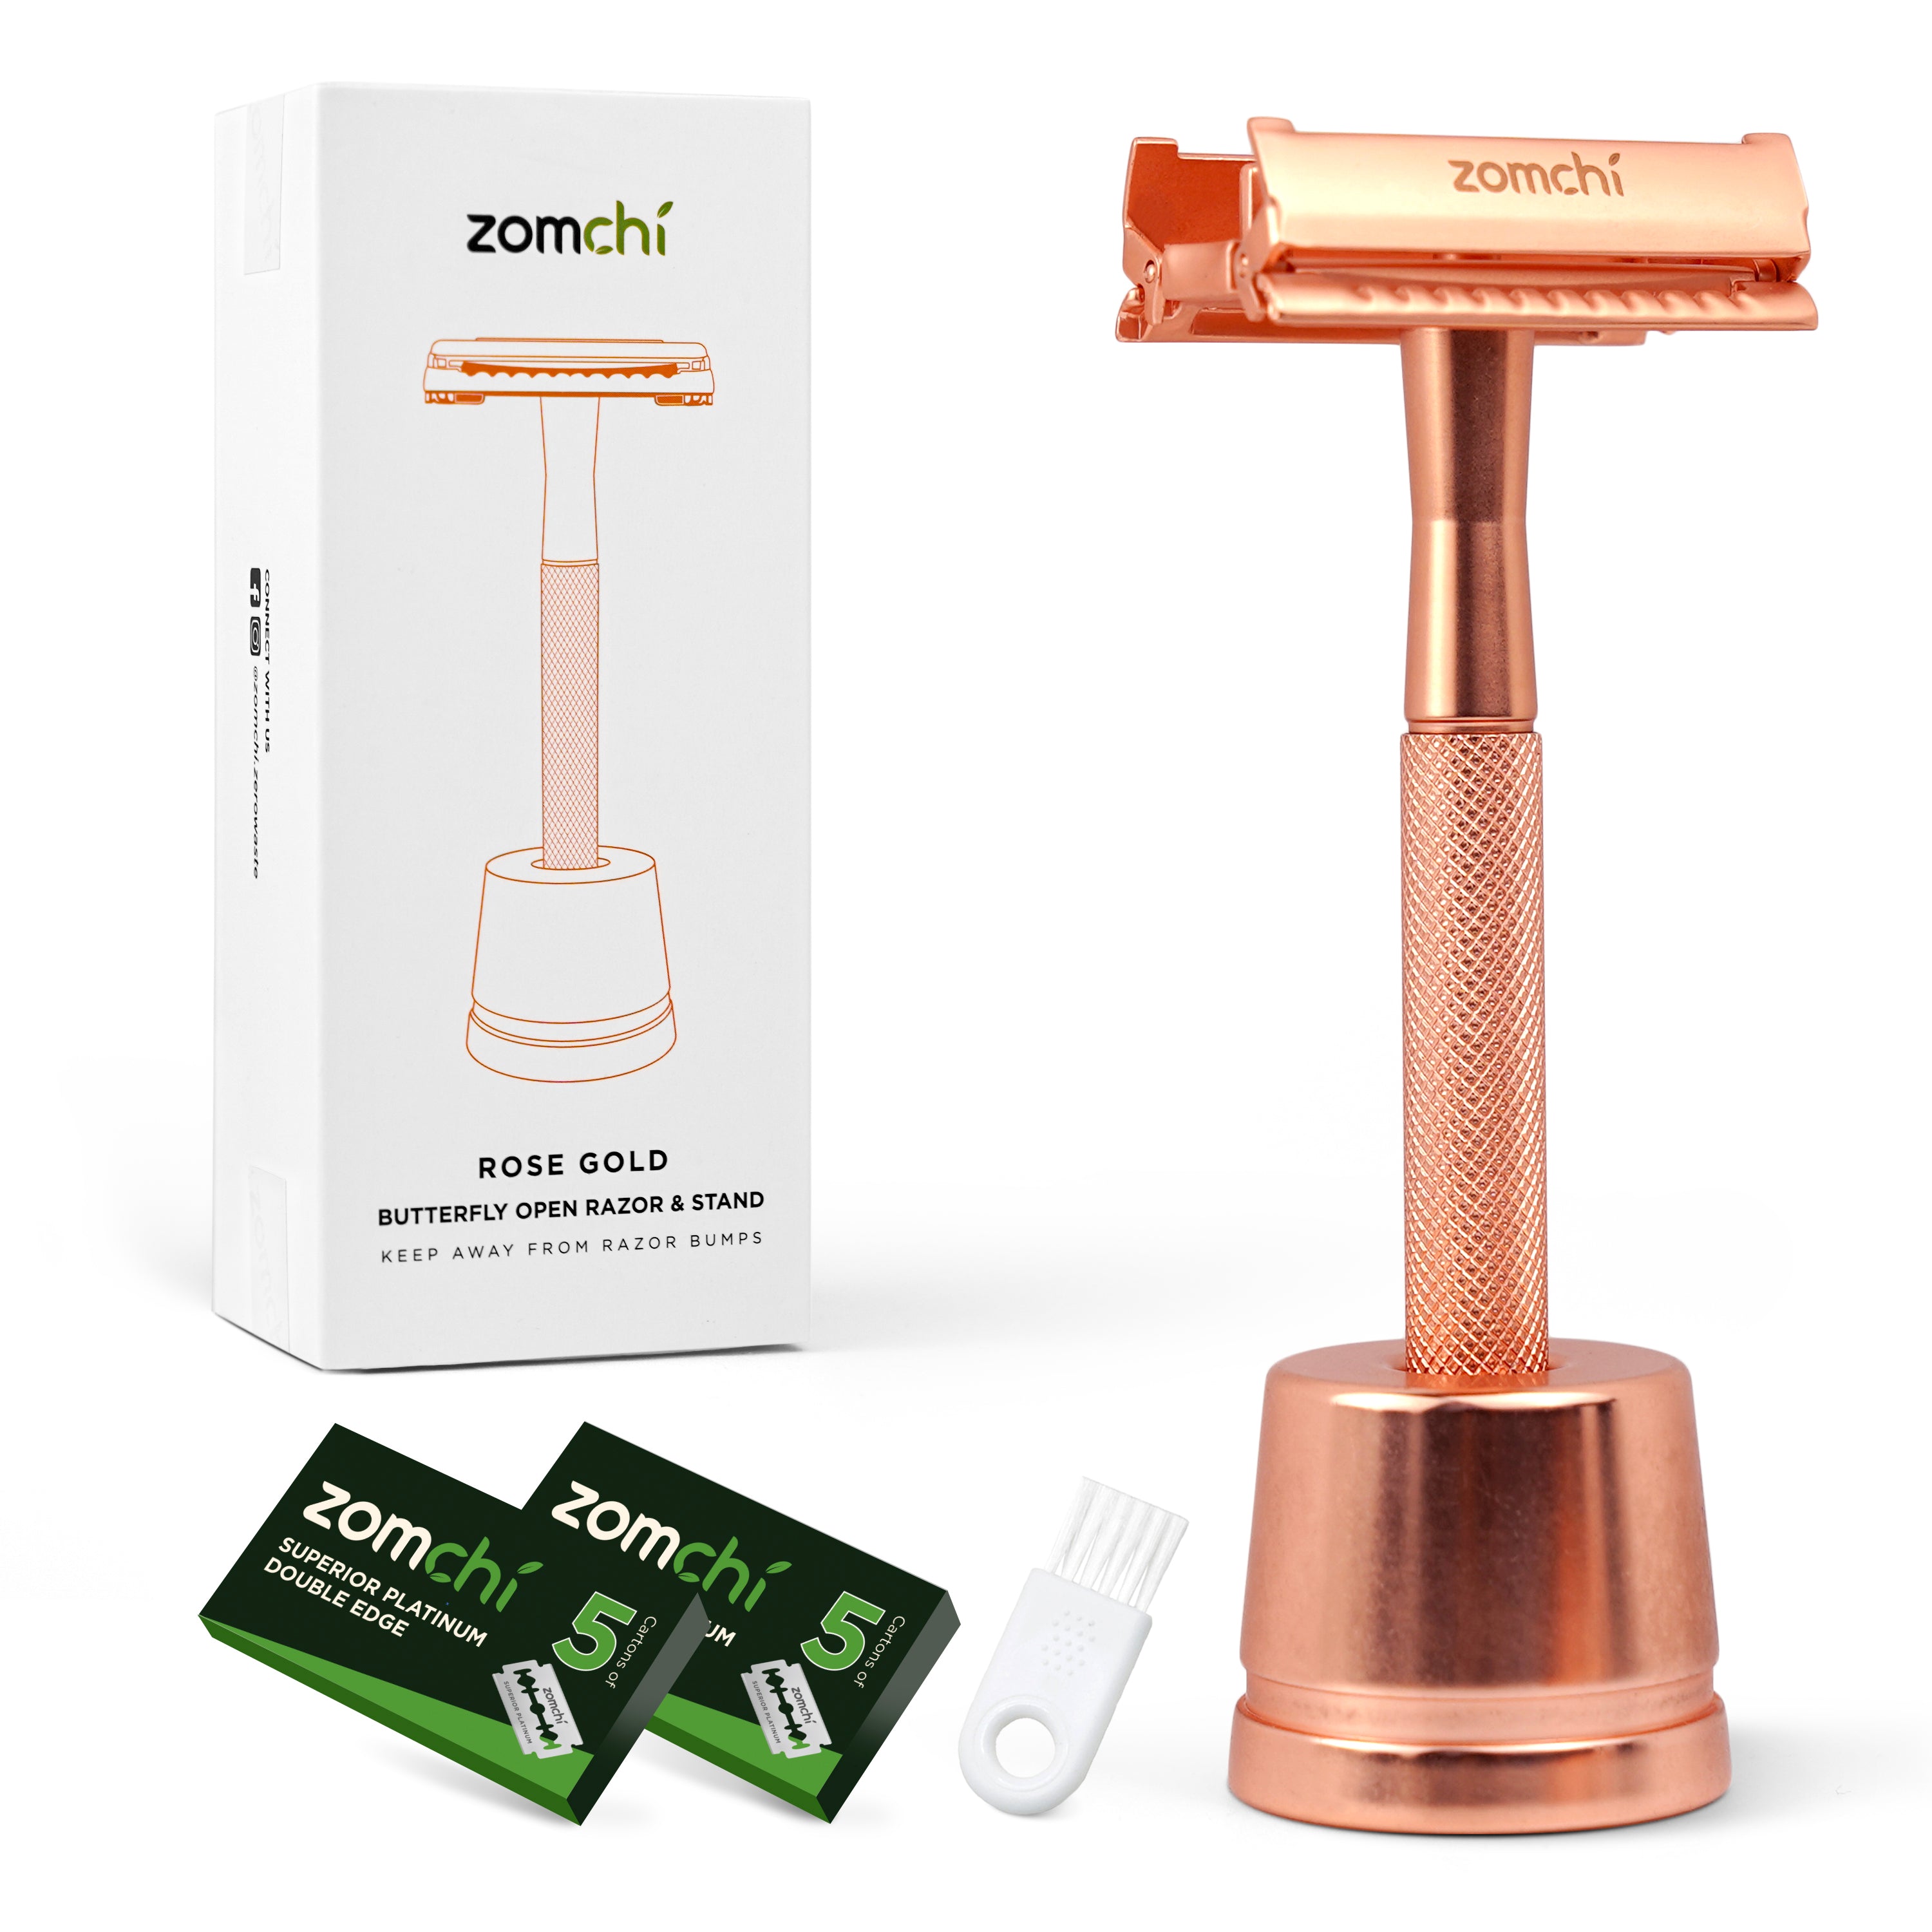 Rose Gold Butterfly Open Razors With Stand